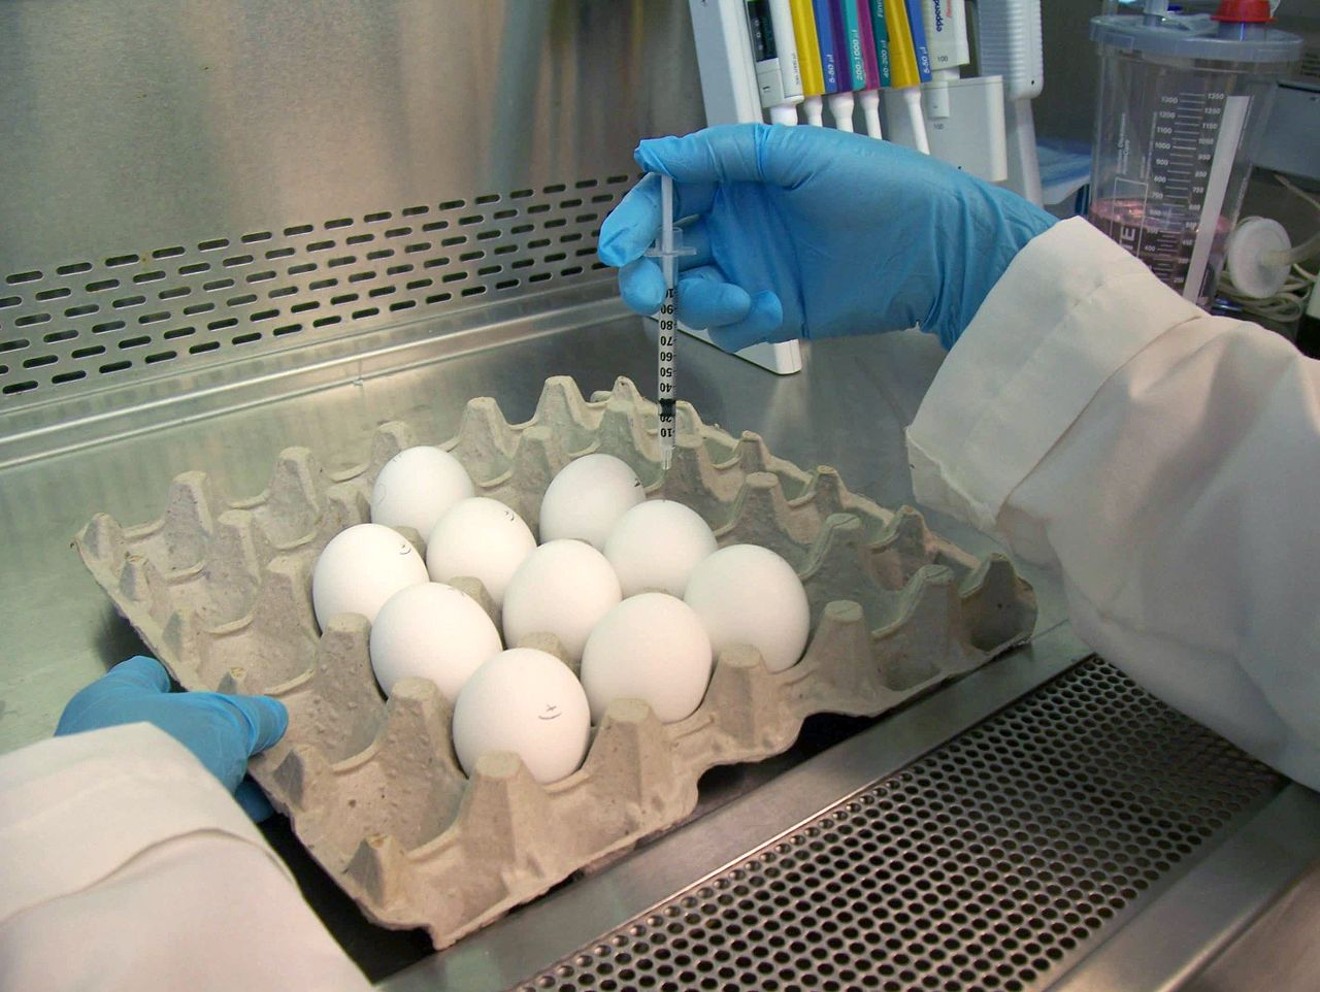 A scientist works on manufacturing the flu vaccine.